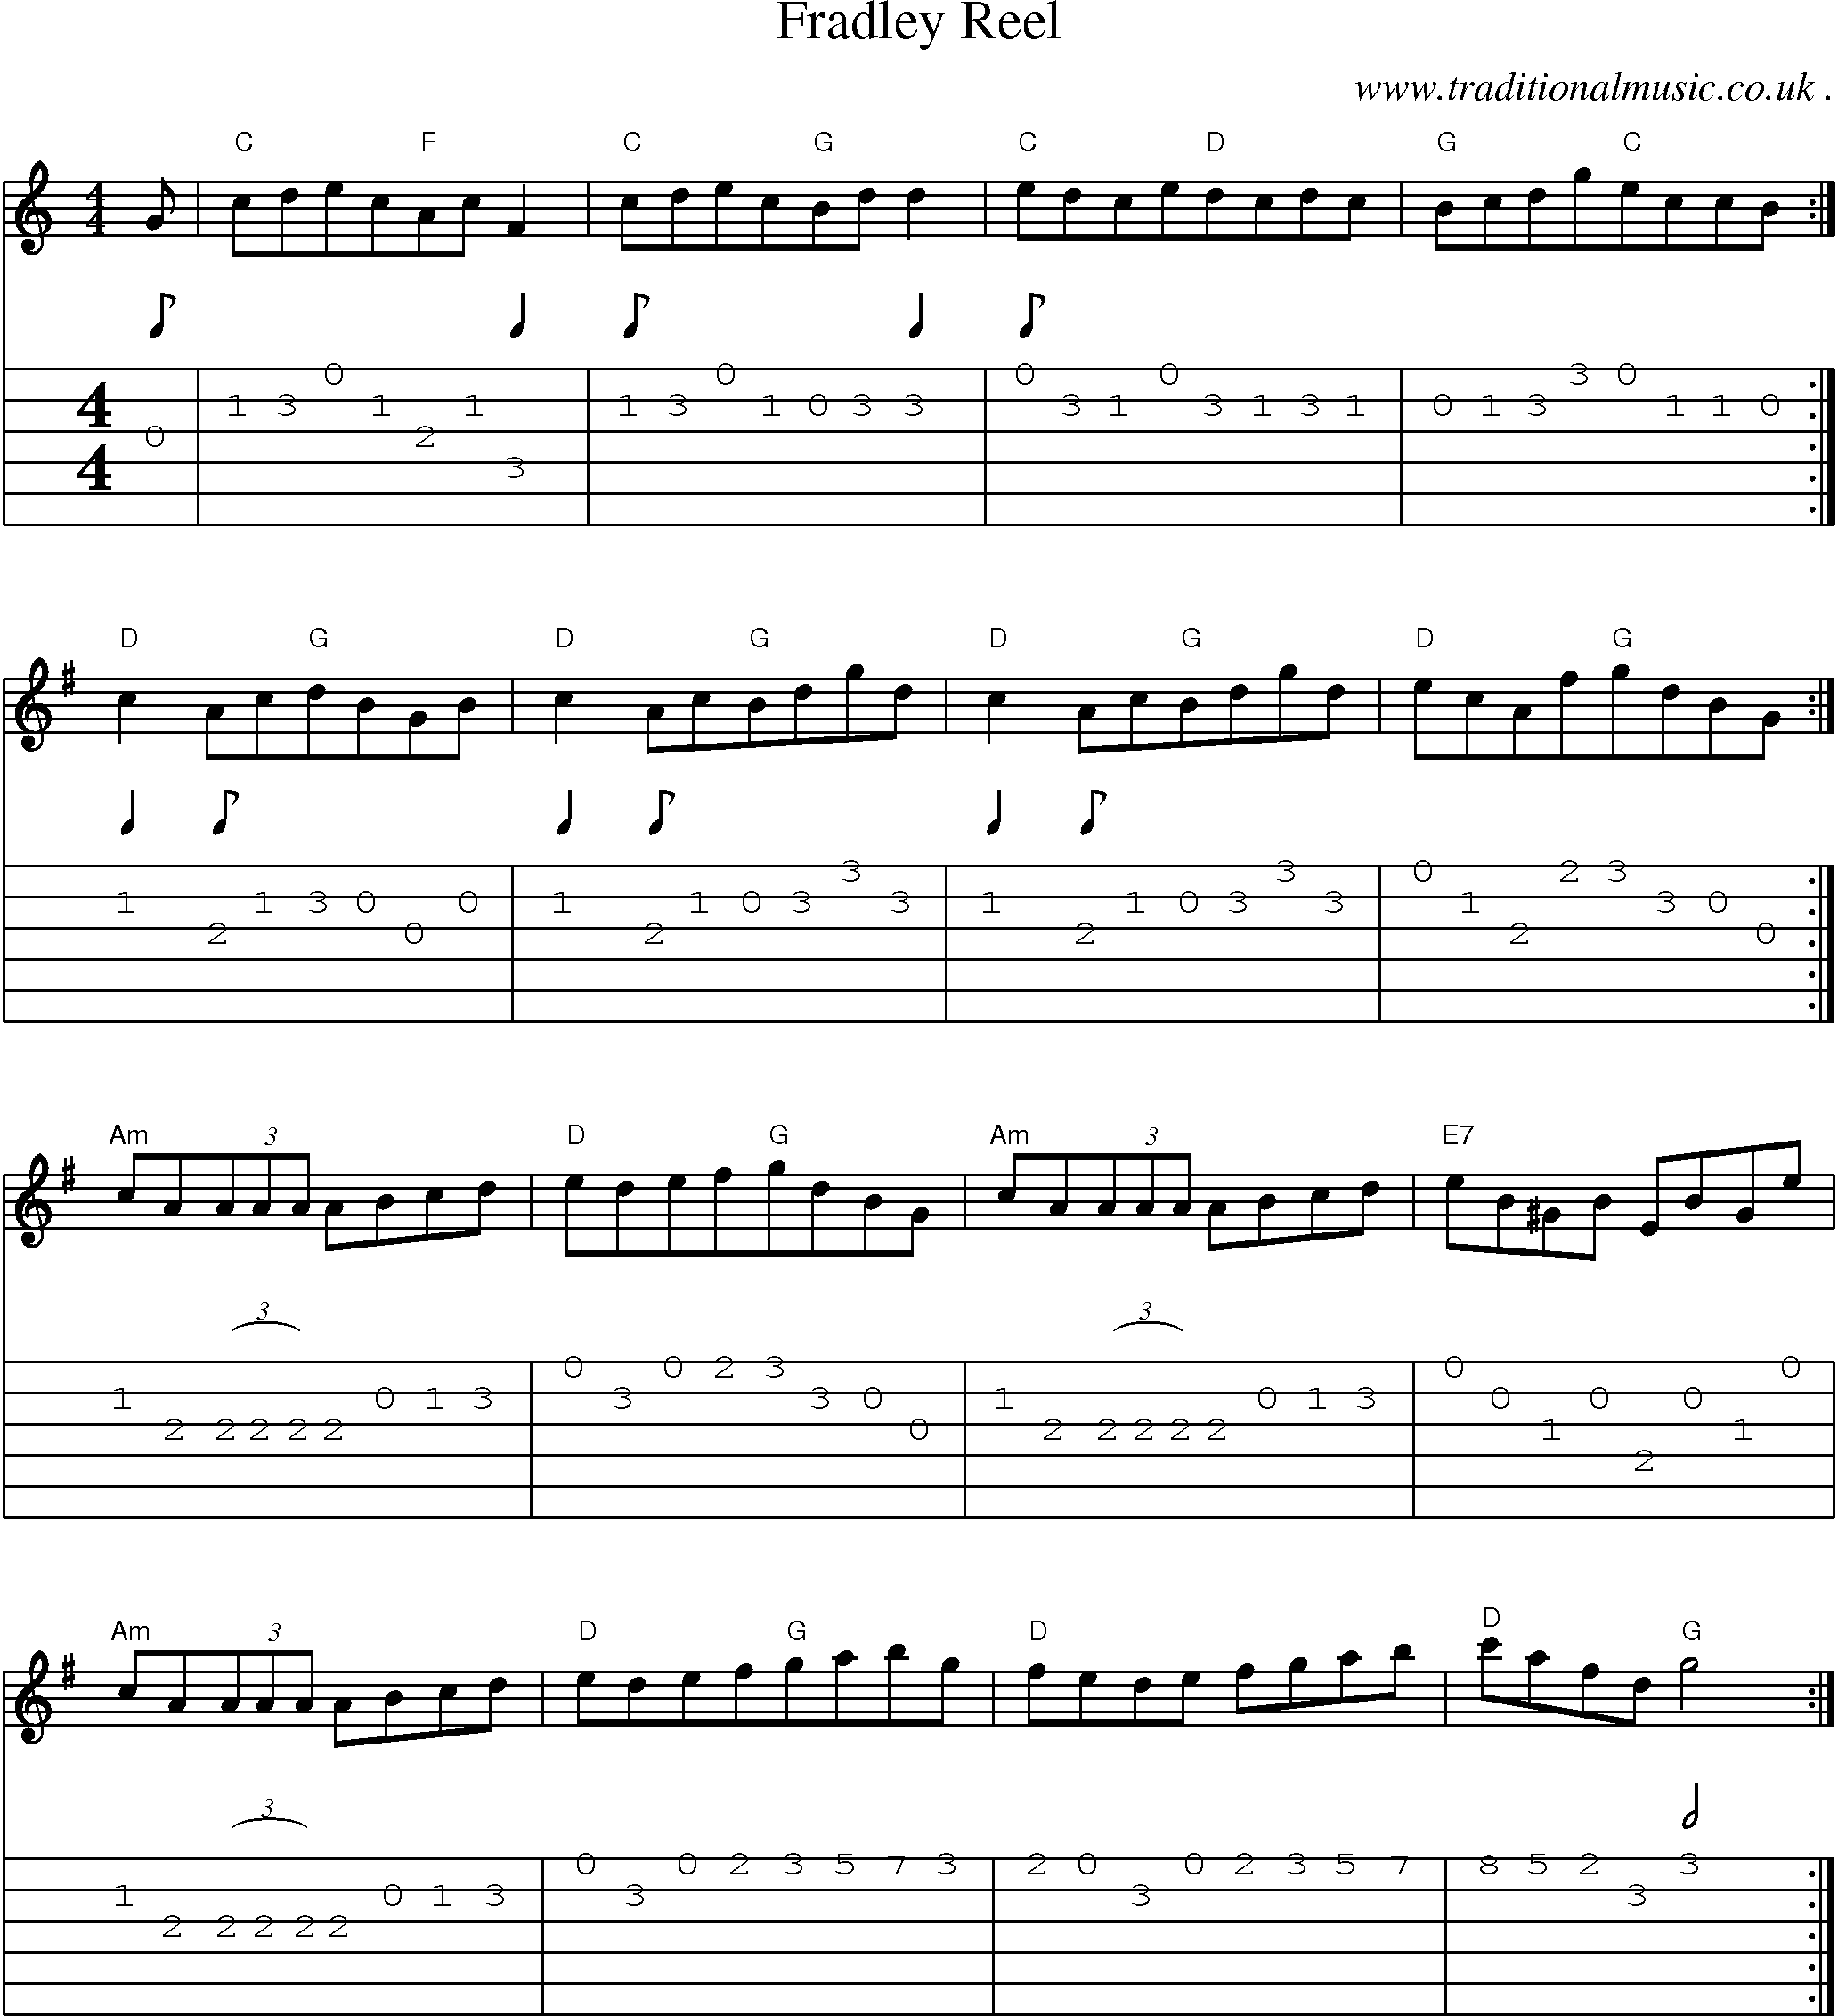 Sheet-Music and Guitar Tabs for Fradley Reel